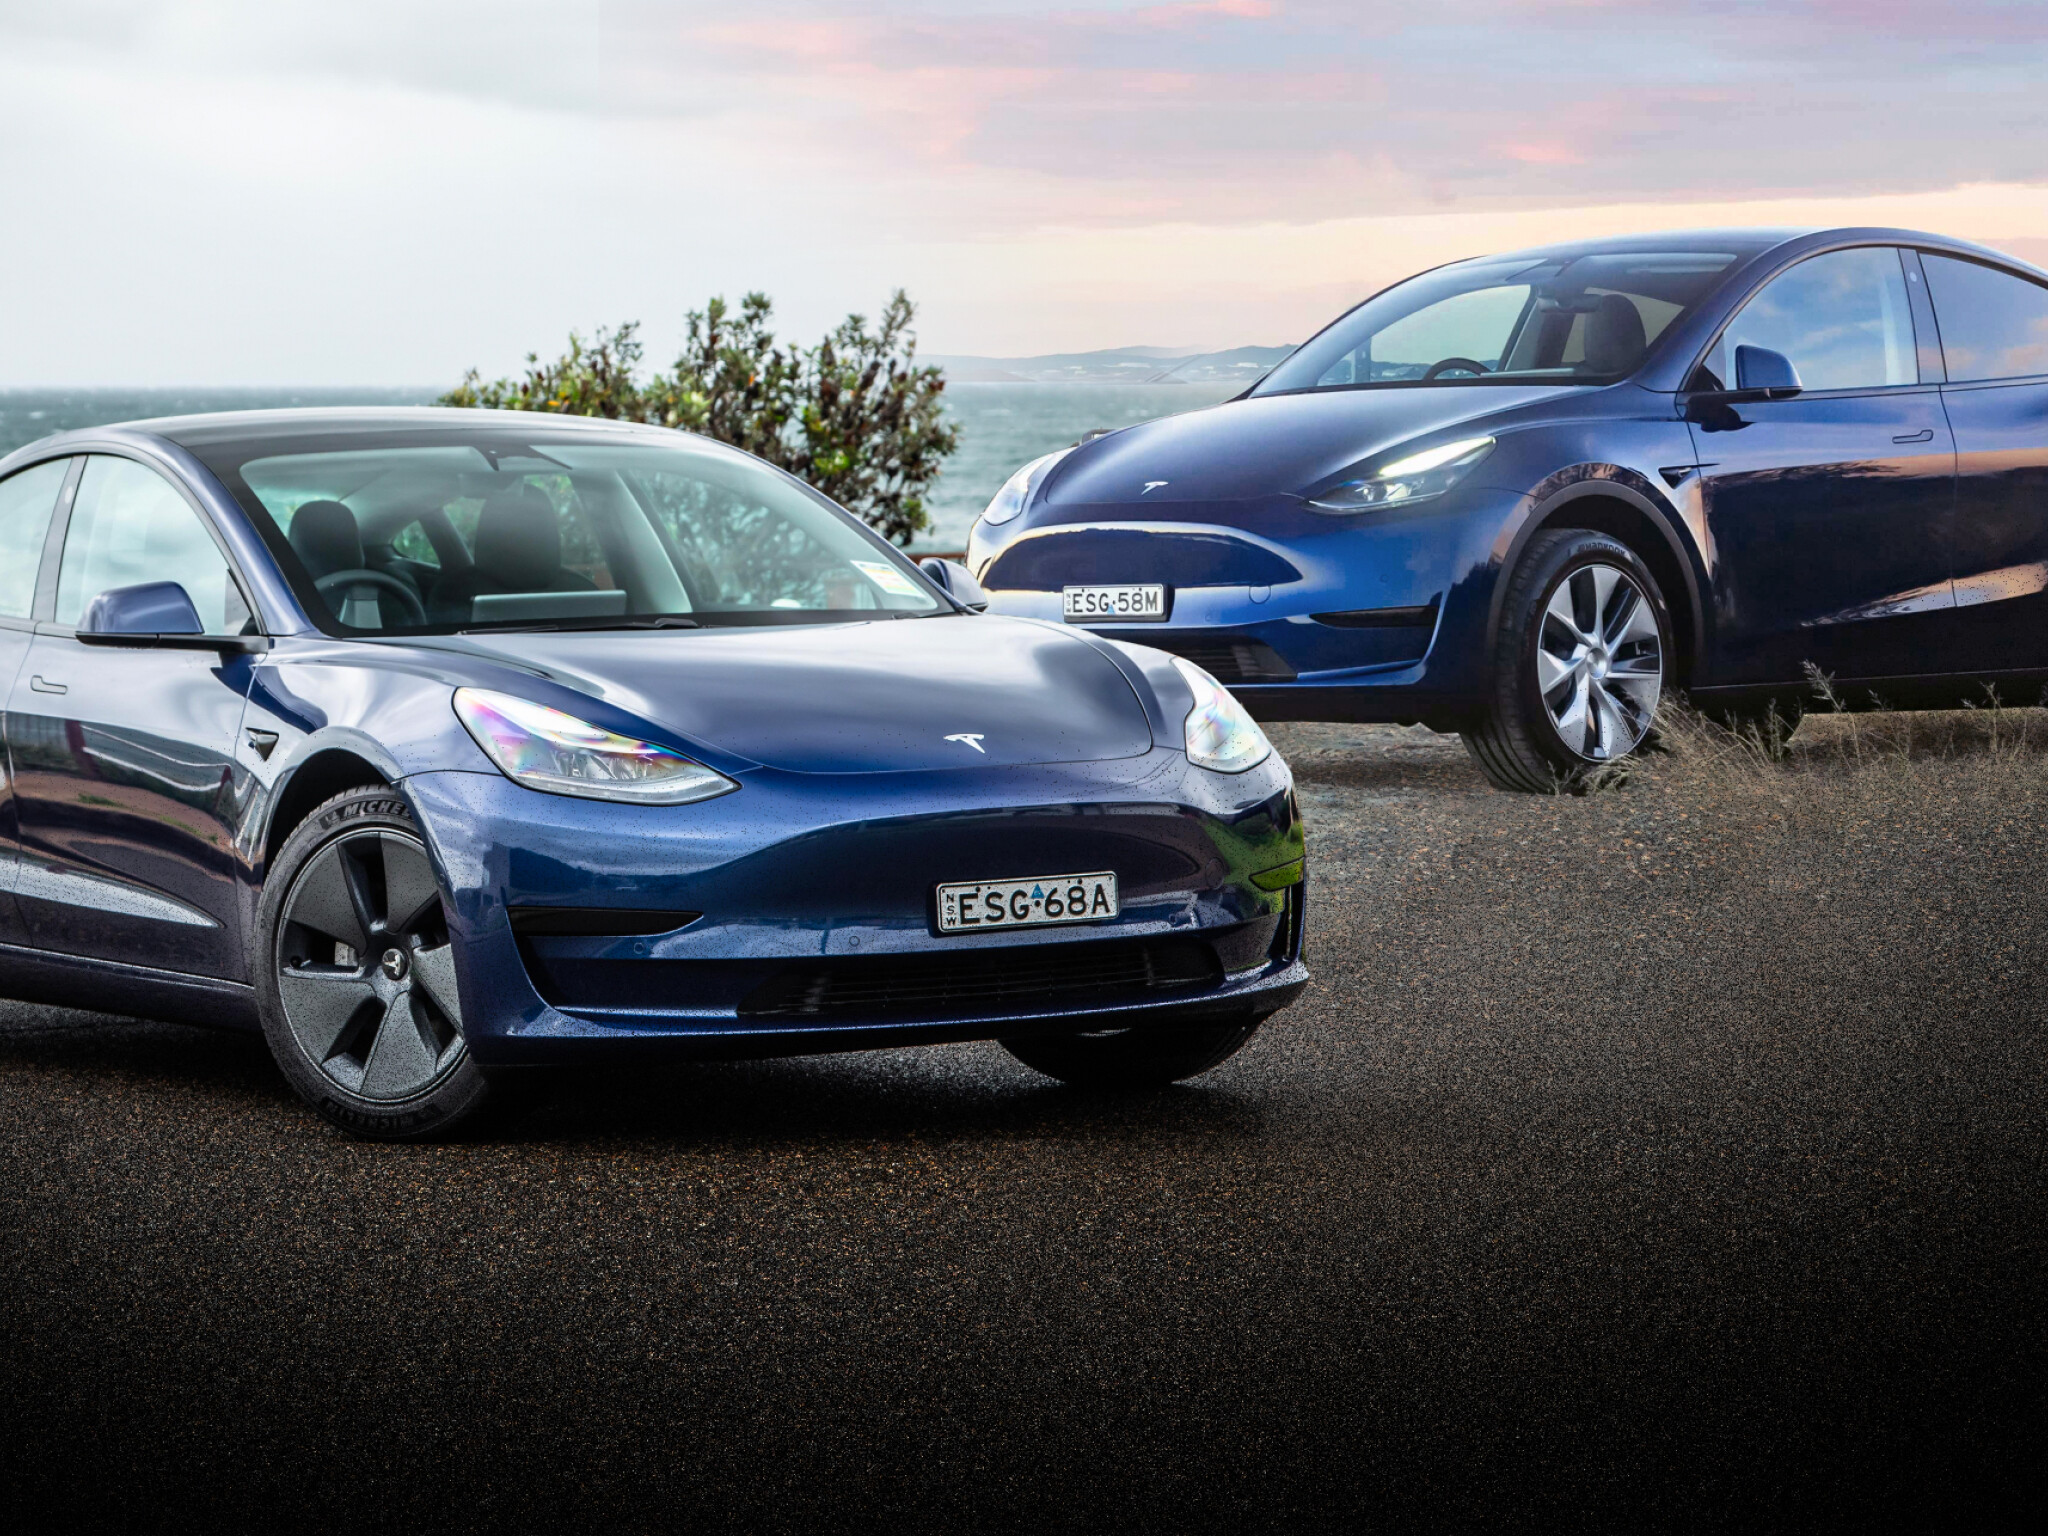 Tesla Model 3 Vs. Model S: Which Electric Vehicle Is Better?